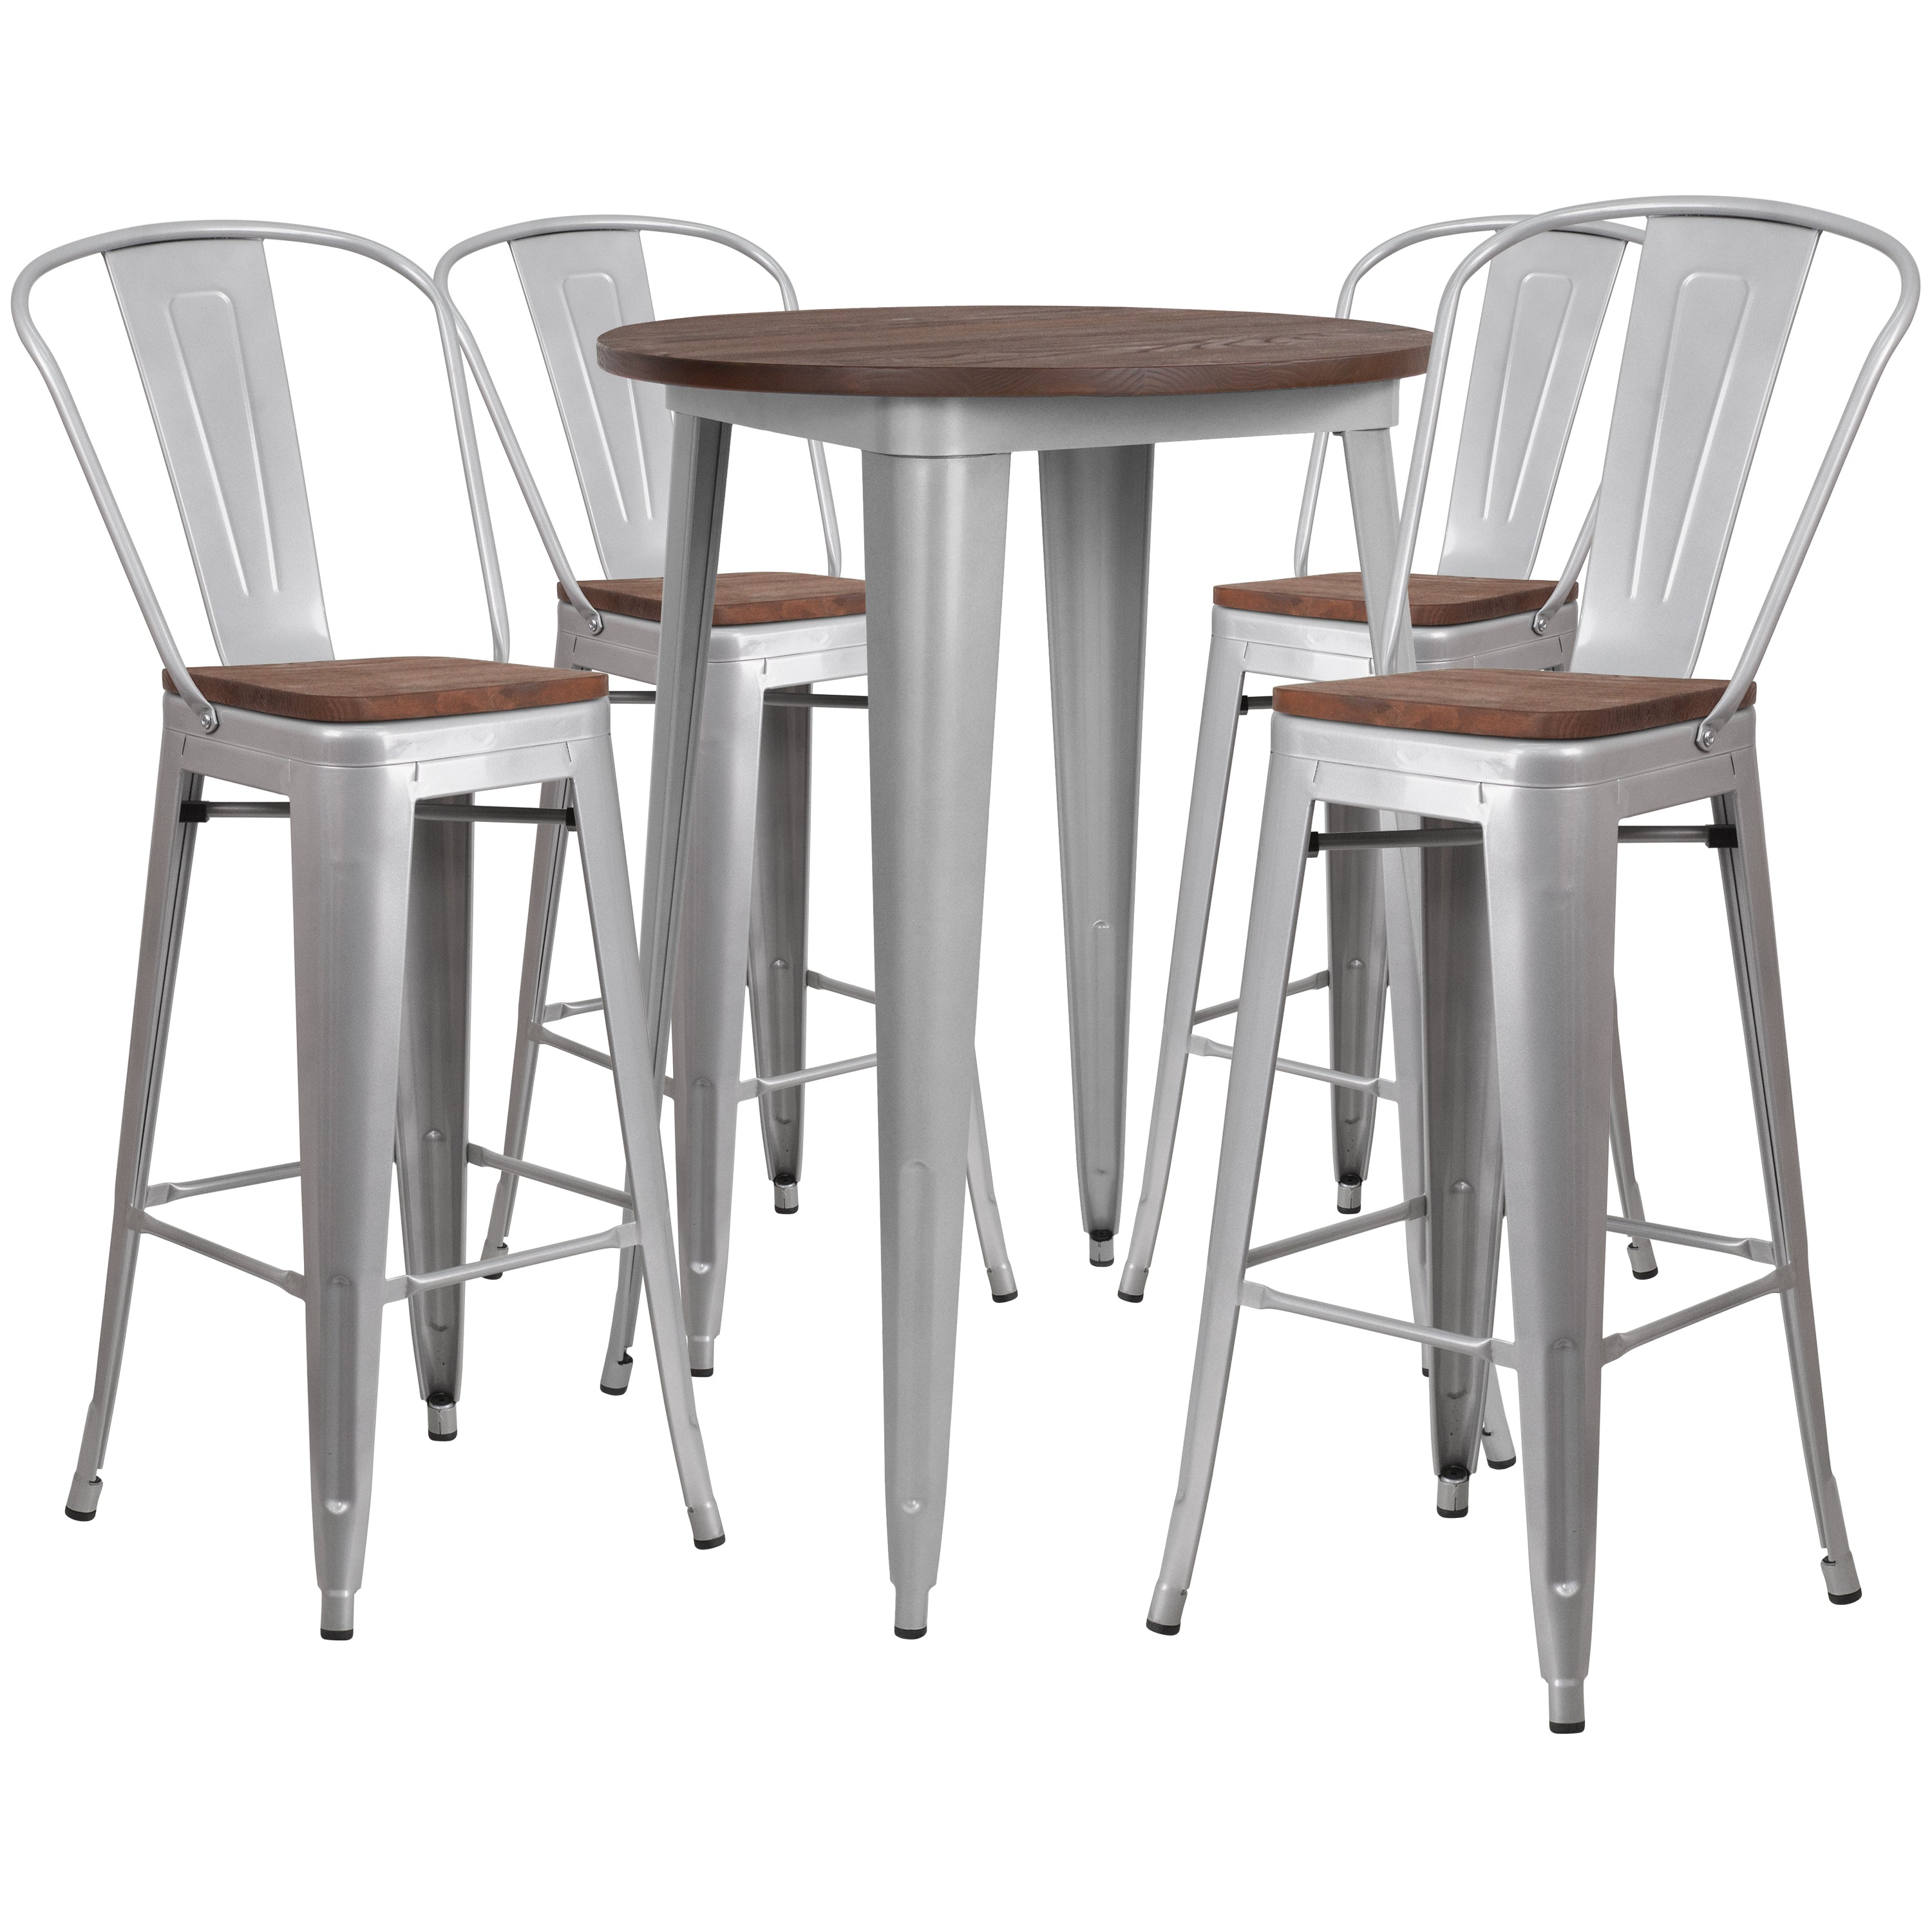 30" Round Metal Bar Table Set with Wood Top and 4 Stools-Metal/ Colorful Bar Table and Stool Set-Flash Furniture-Wall2Wall Furnishings